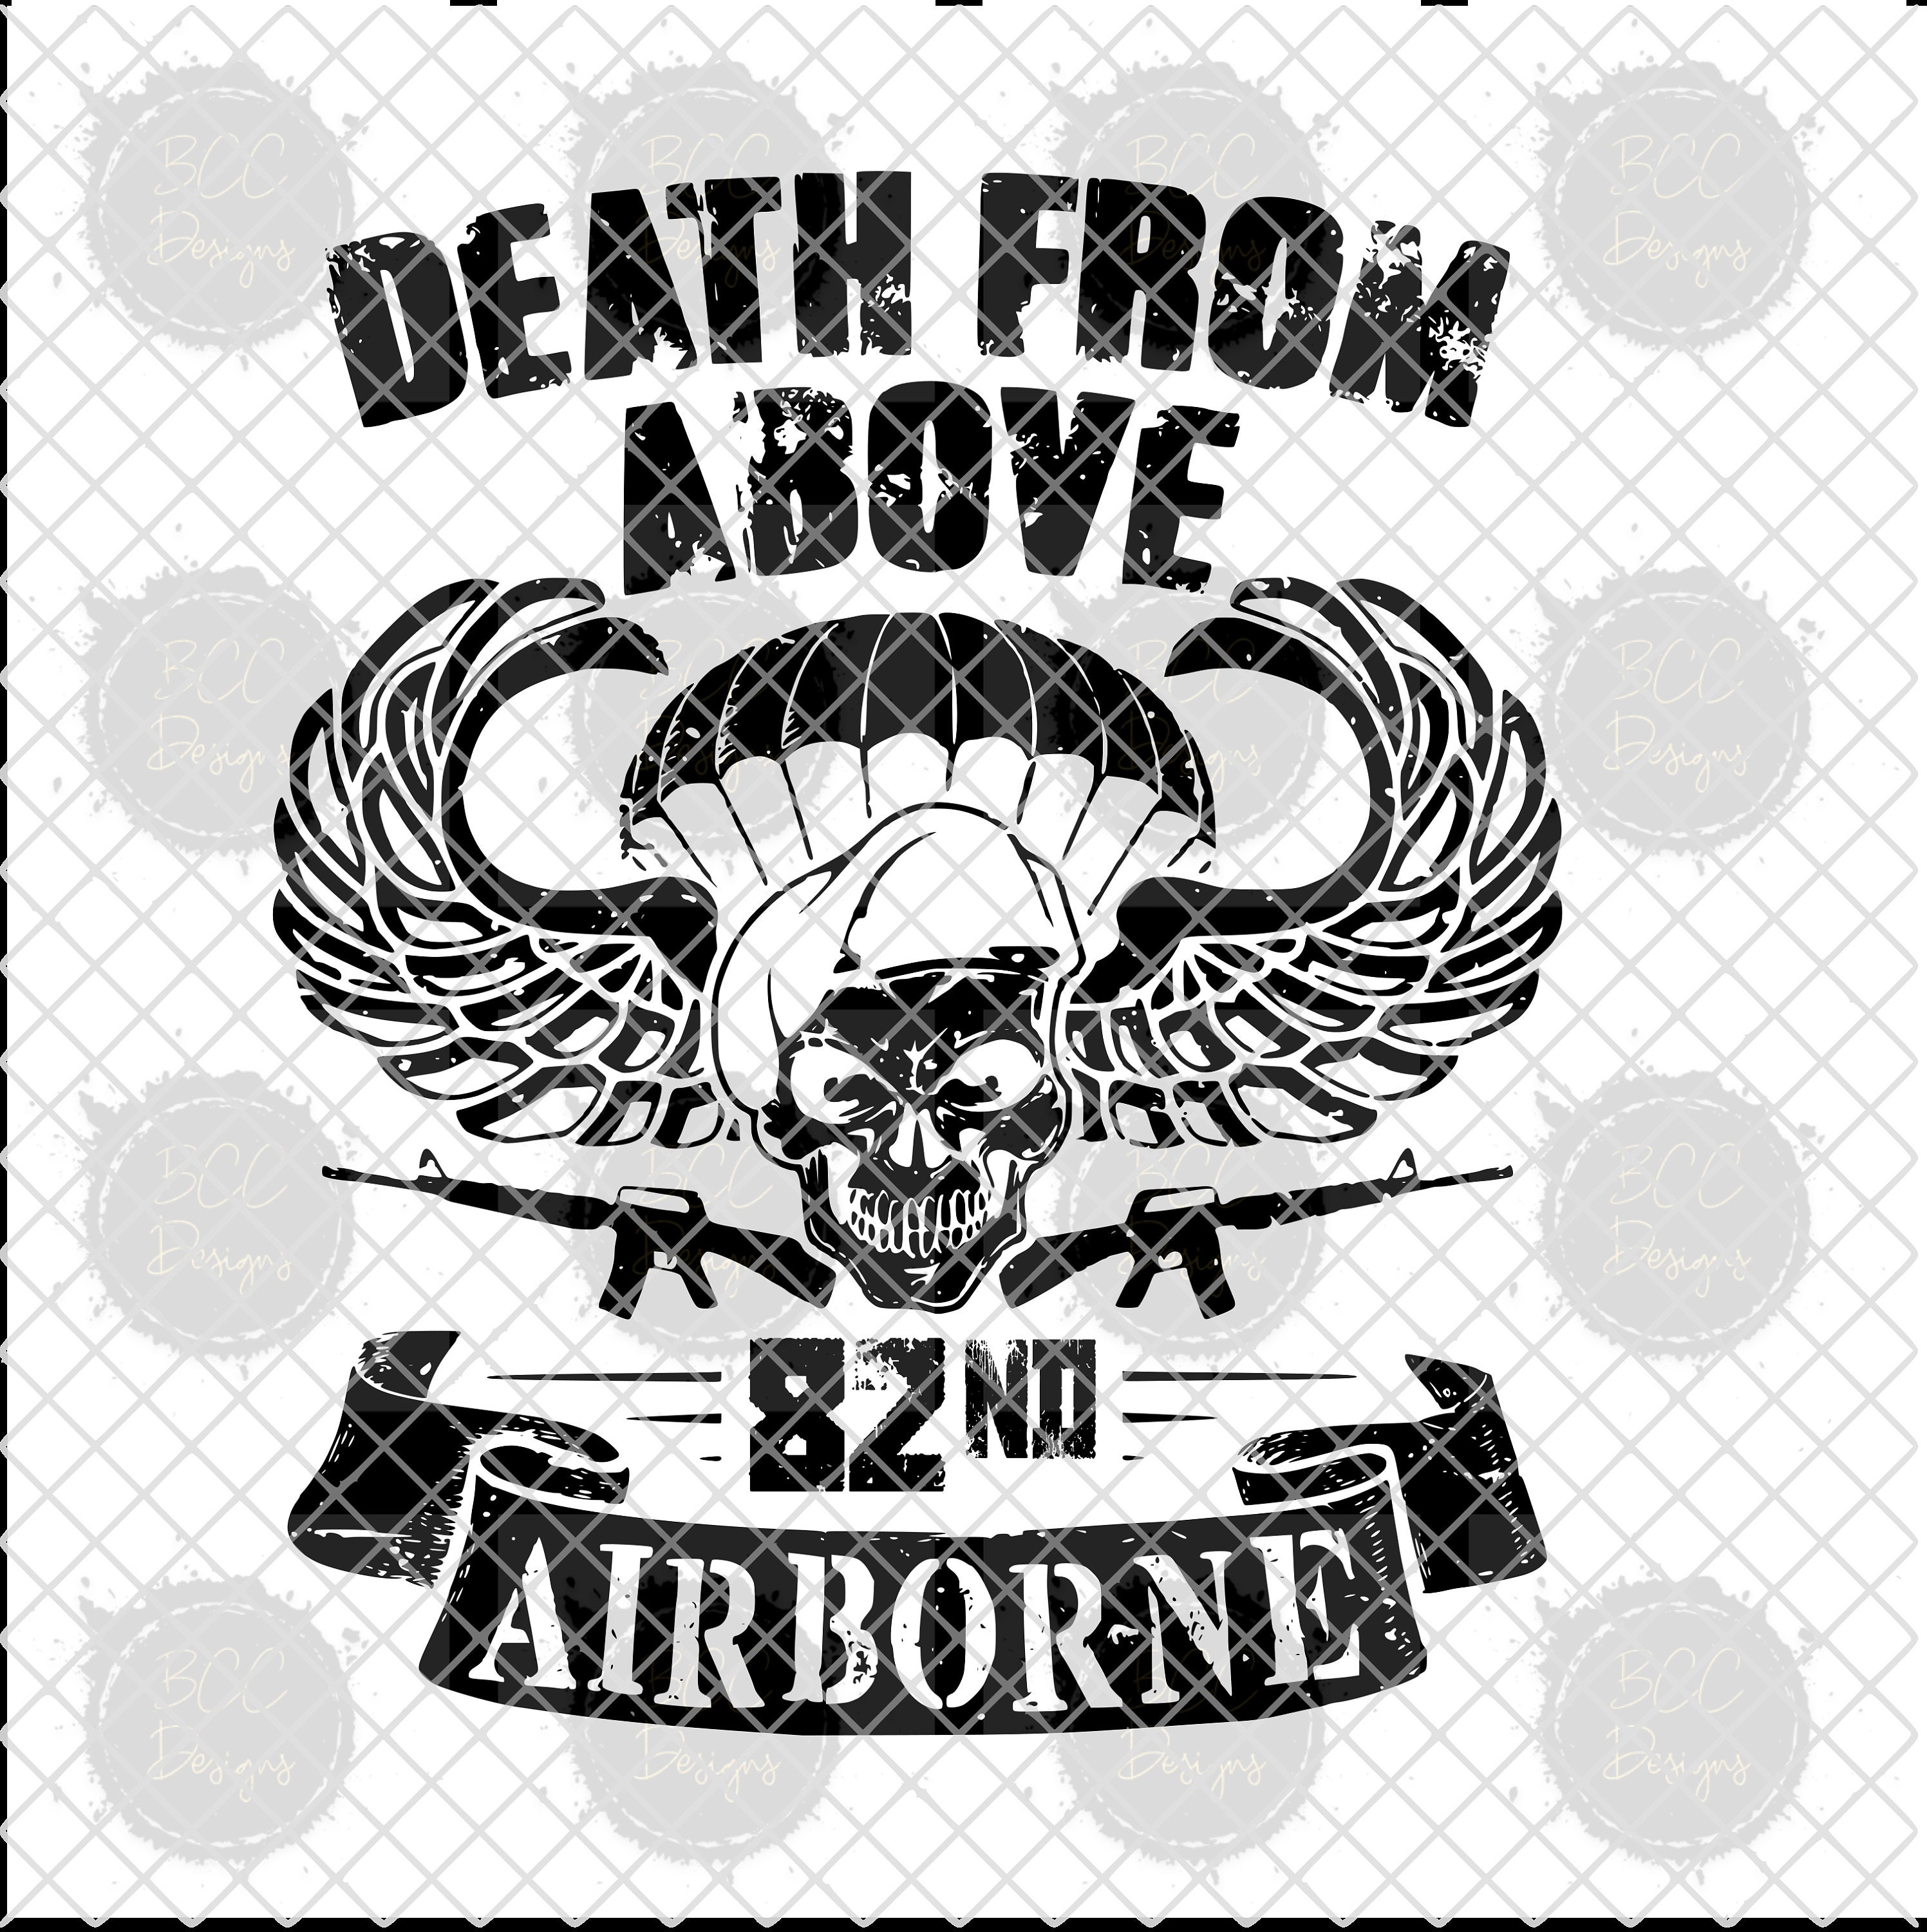 82nd Airborne Death From Above Png Svg Etsy Denmark